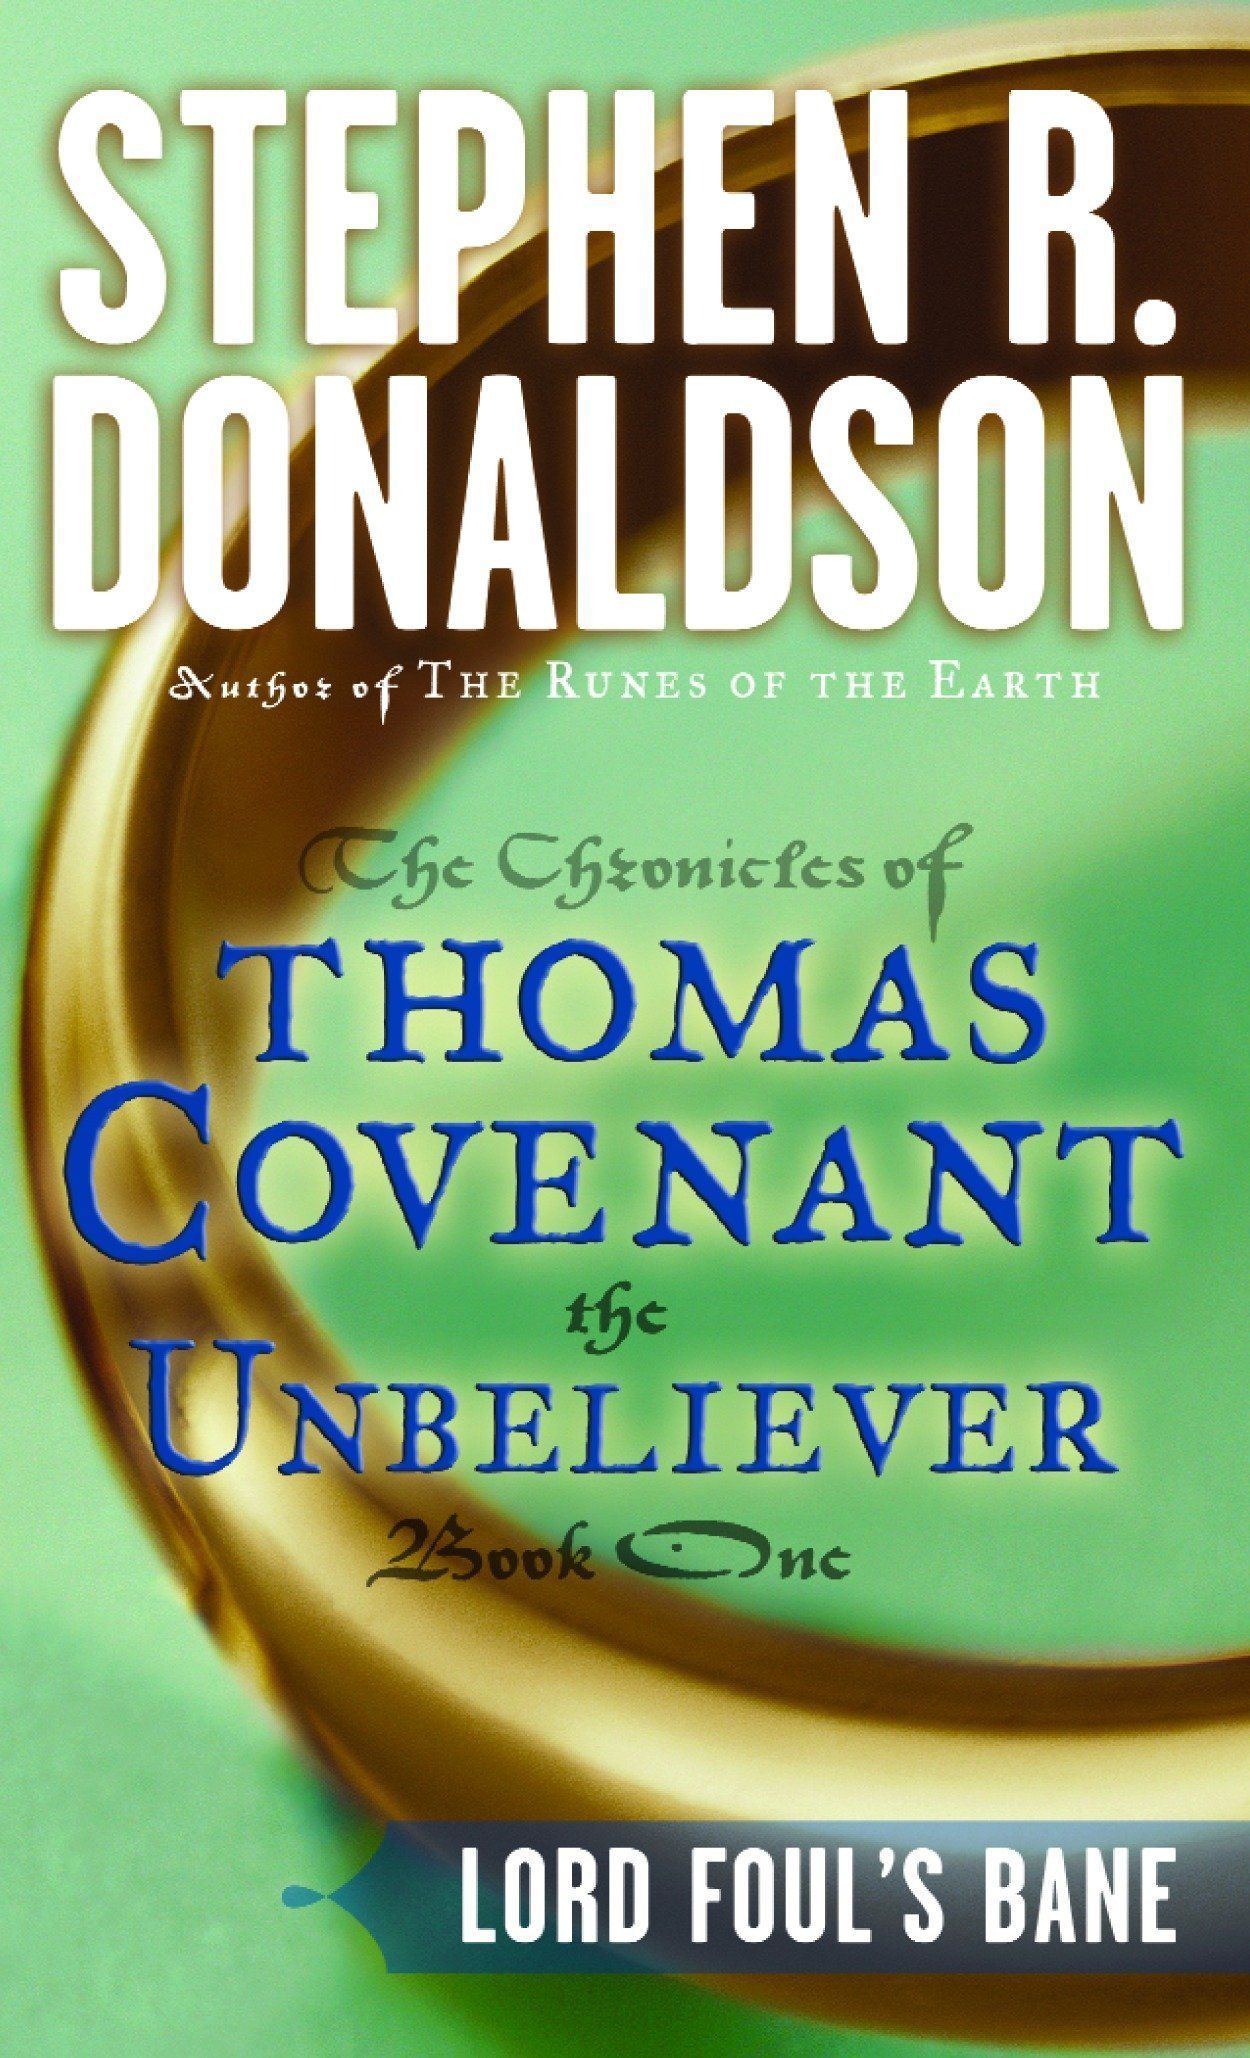 Lord Foul's Bane the Chronicles of Thomas Covenant the Unbeliever book cover by Stephen Donaldson